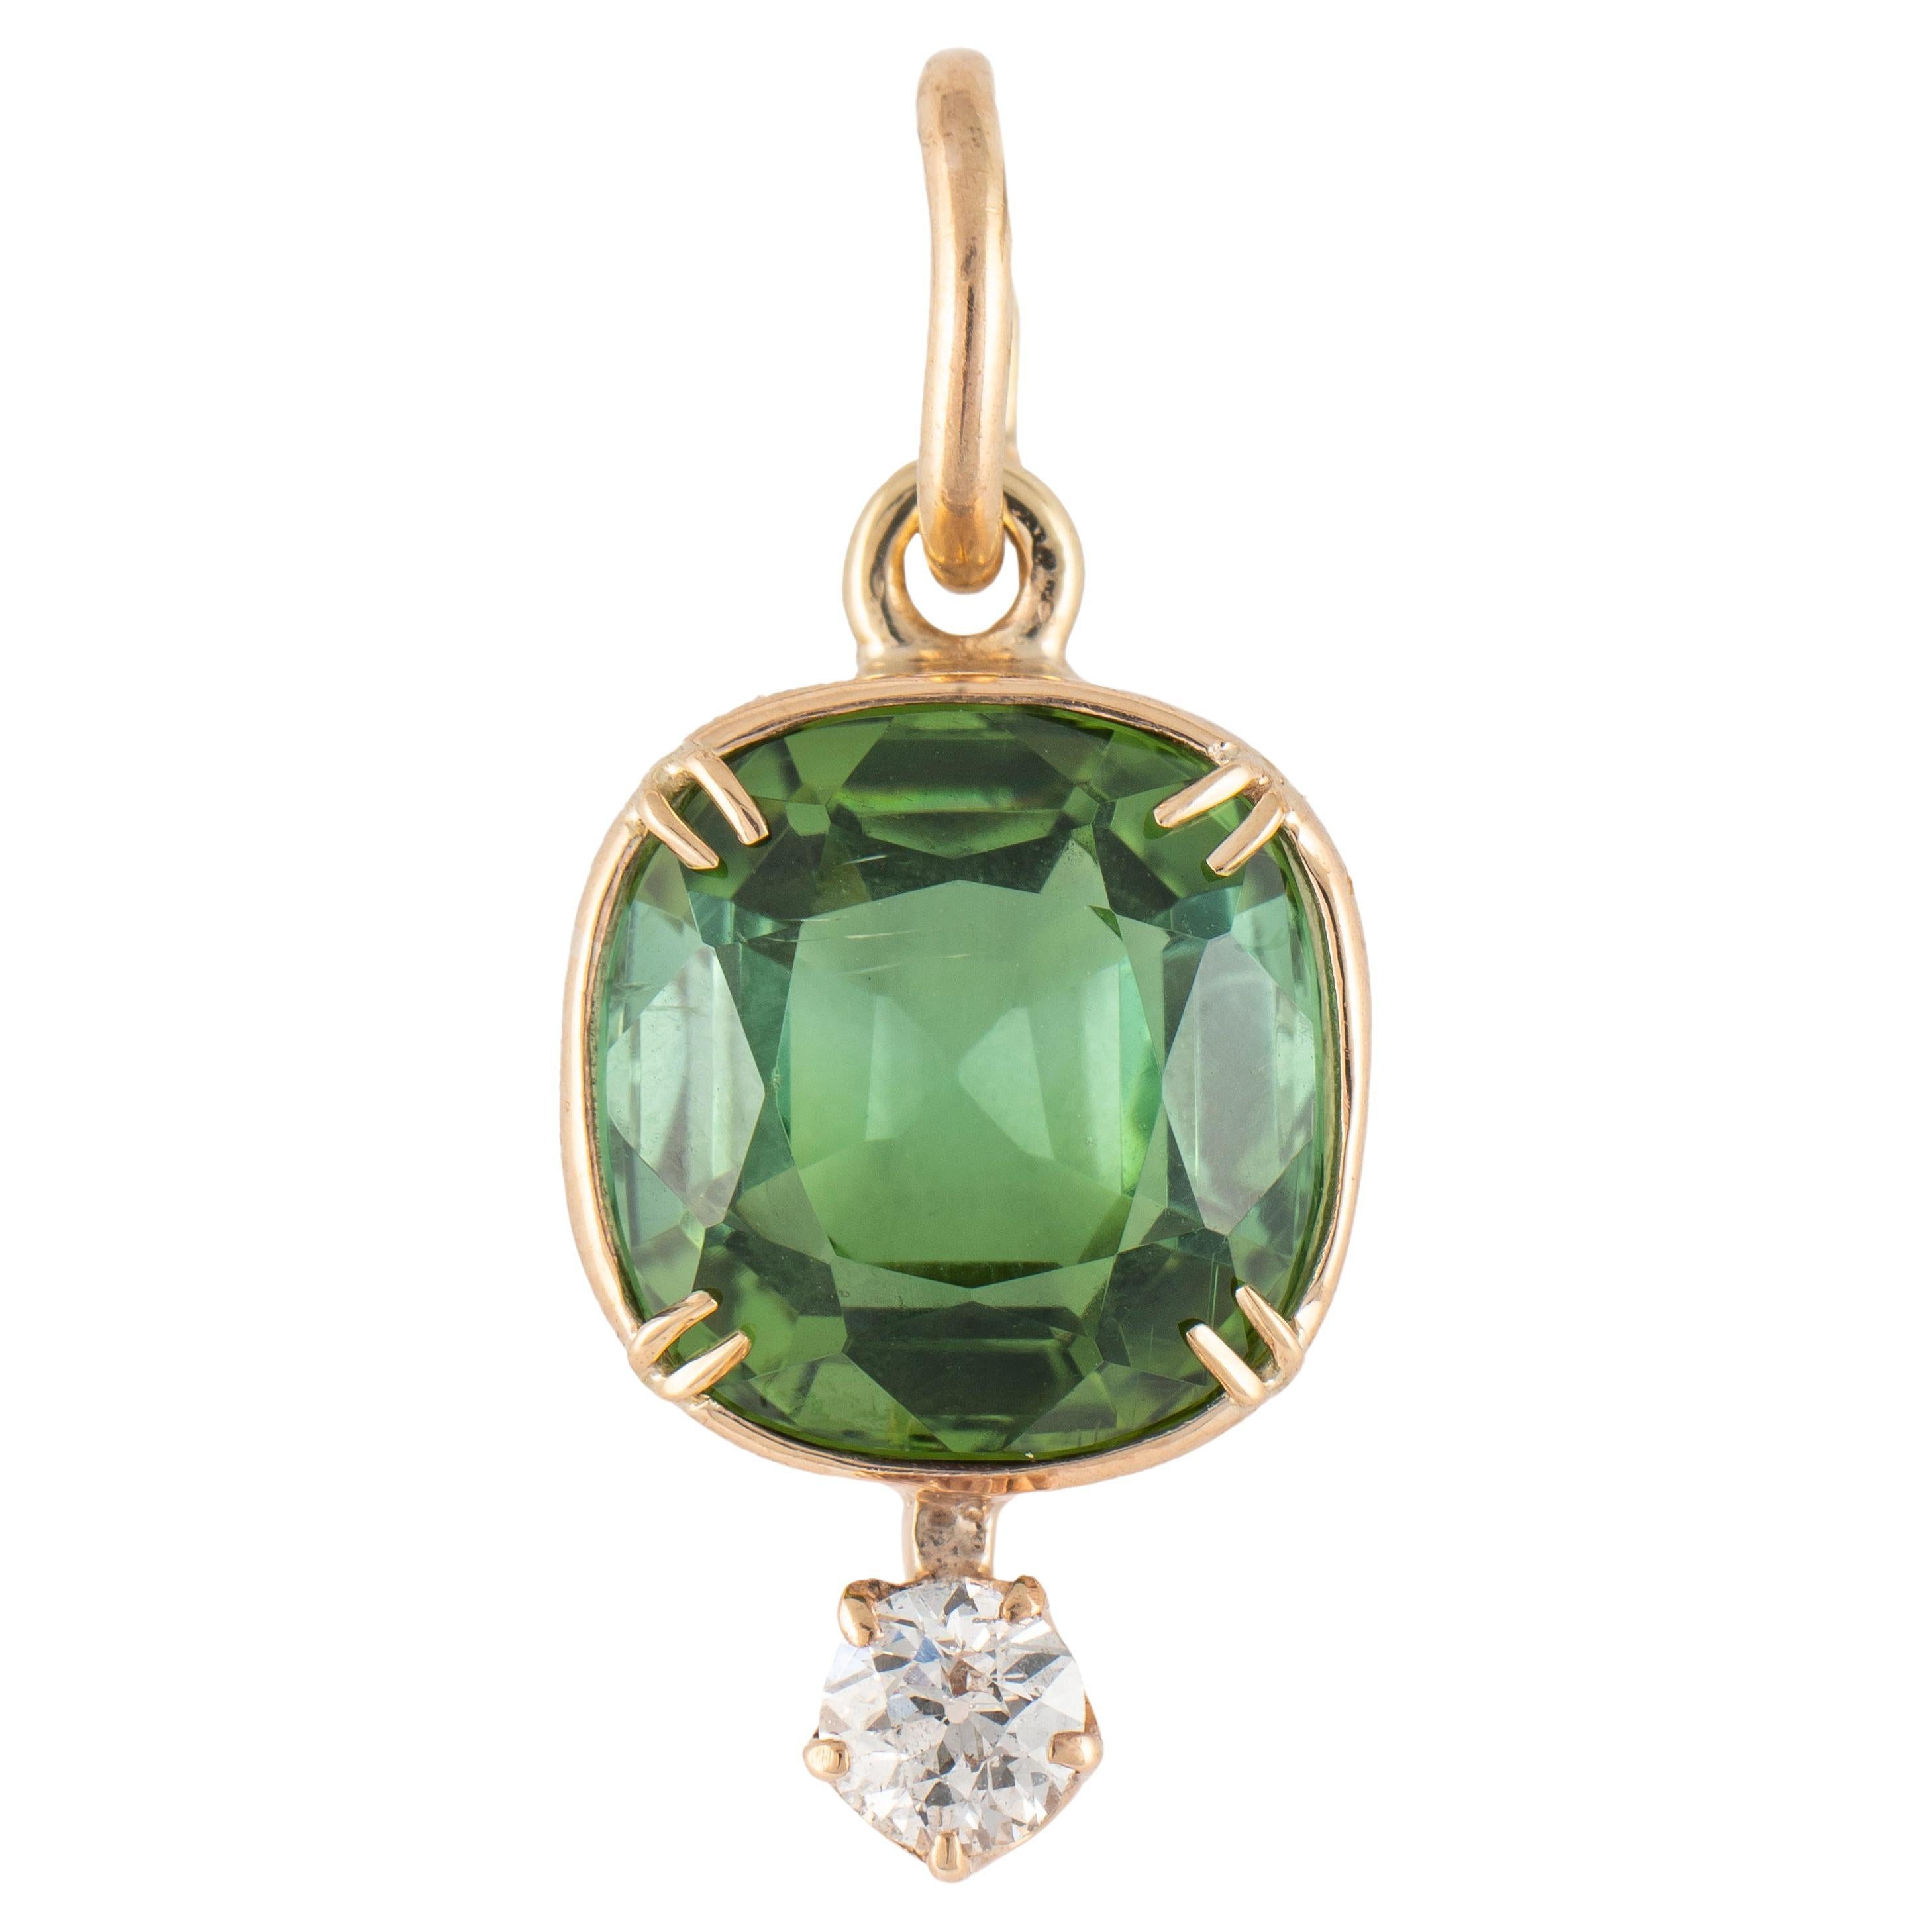 This beautiful and timeless 14k yellow gold pendant from the 1930s is bezel set with a luscious cushion-shaped green tourmaline above a prong set bright old-European-cut diamond, fitted with an oval gold suspension ring.  

Tourmaline measures 8.7 x